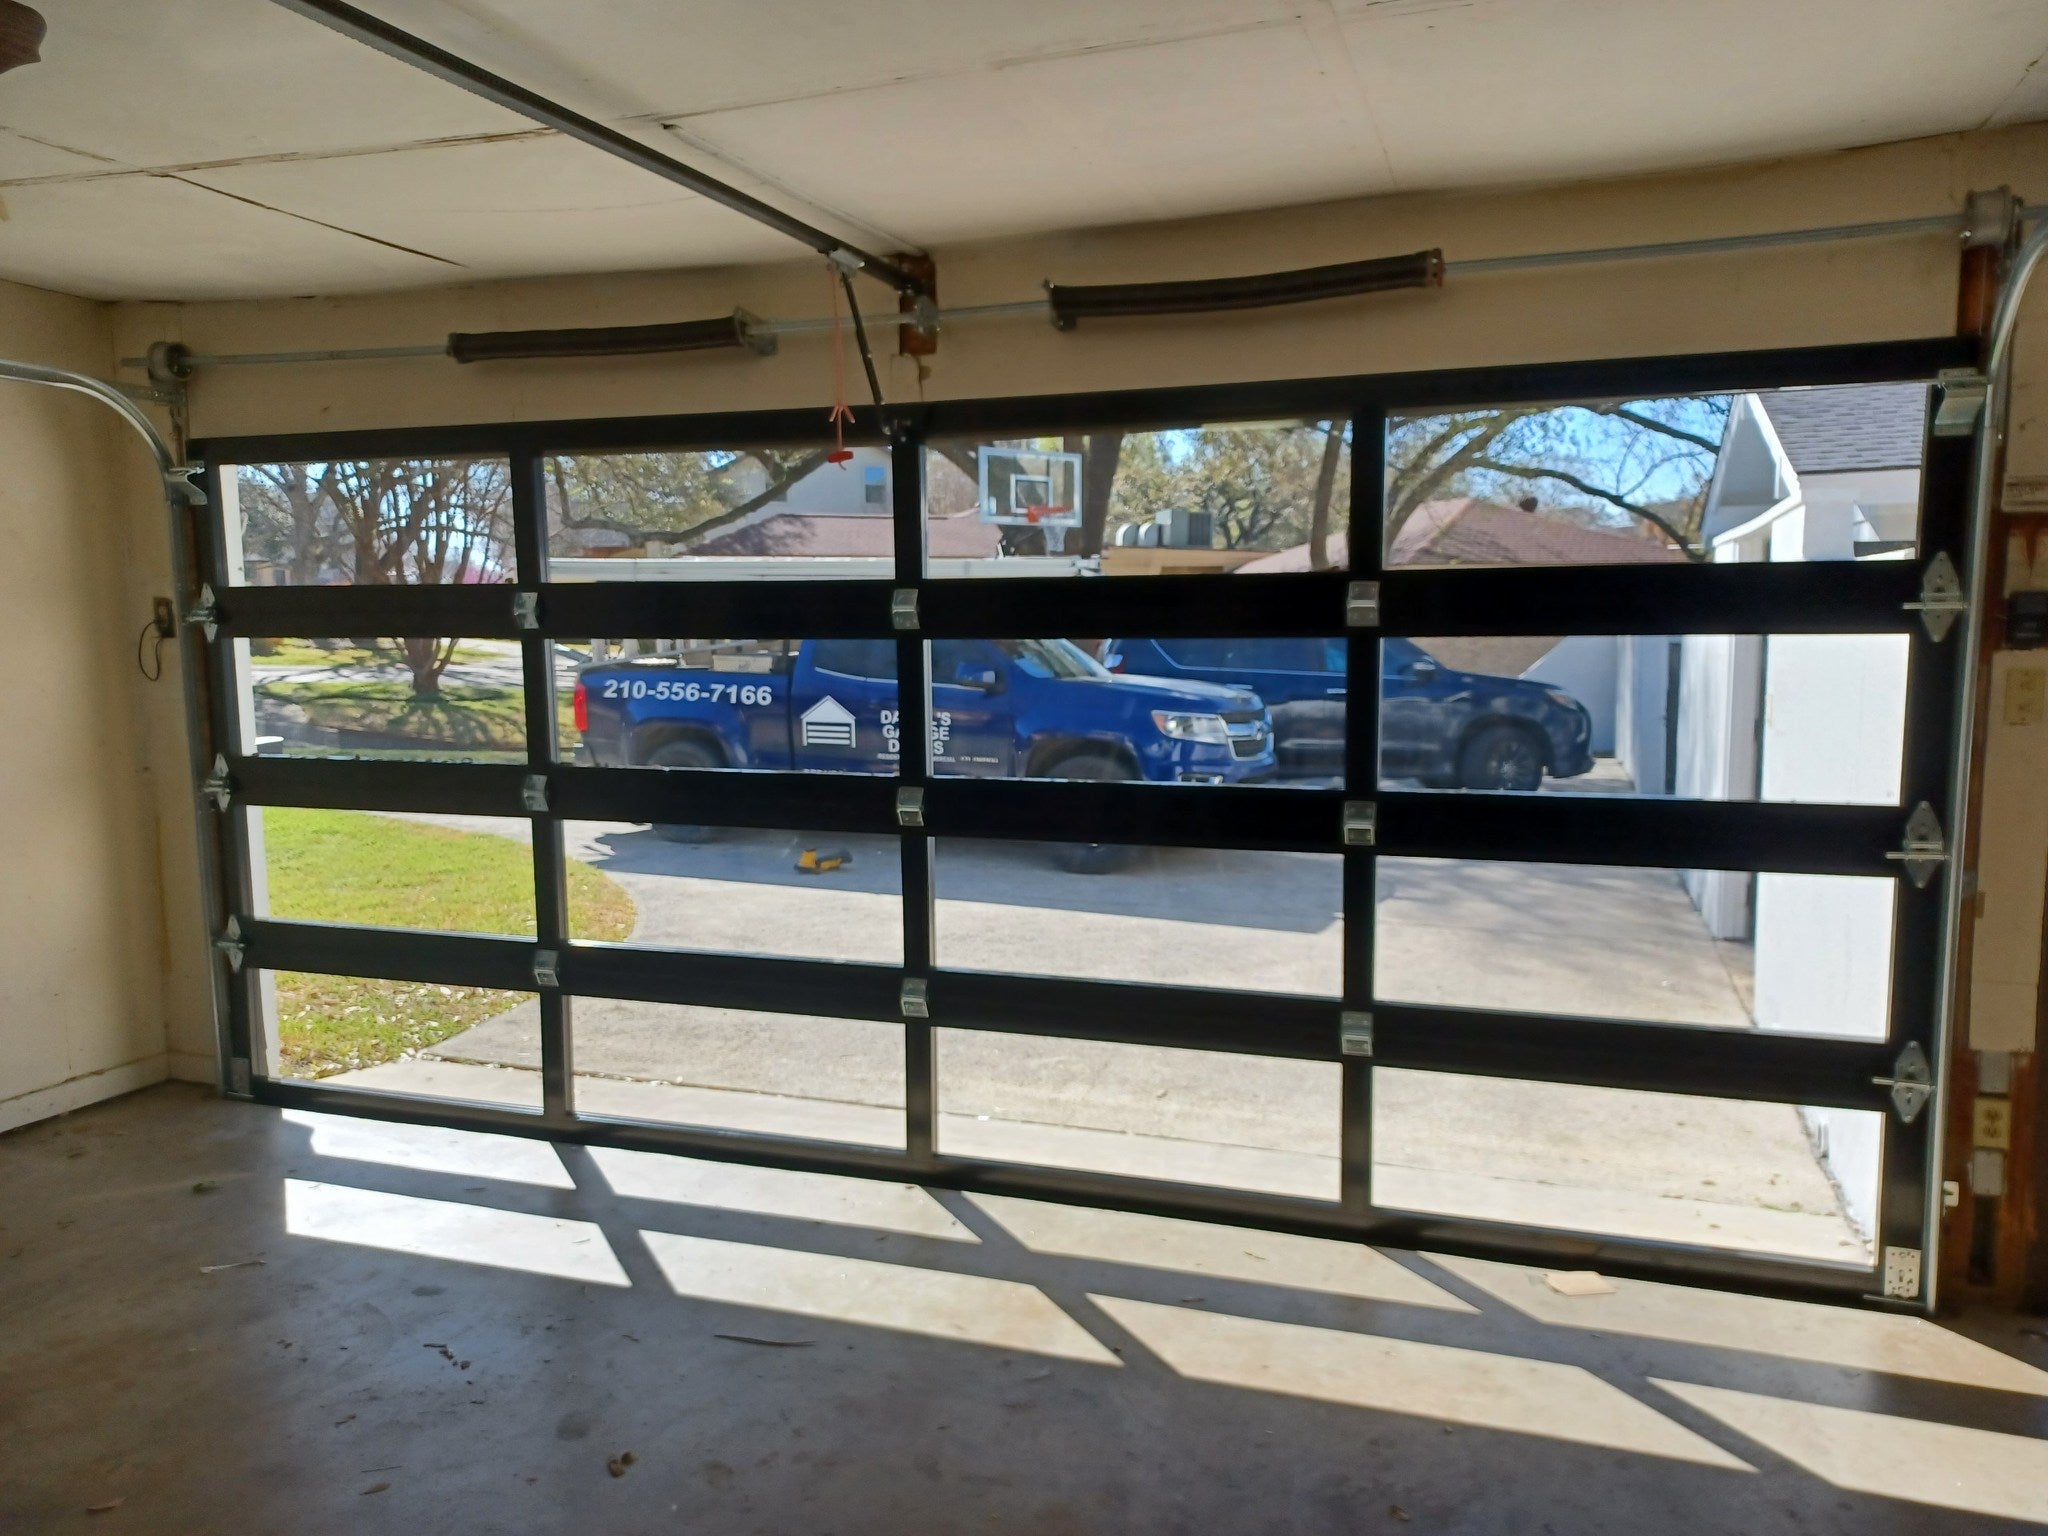 16 FT Wide By 7 FT Tall Full View Garage Door Matt Black Finish With Clear Glass